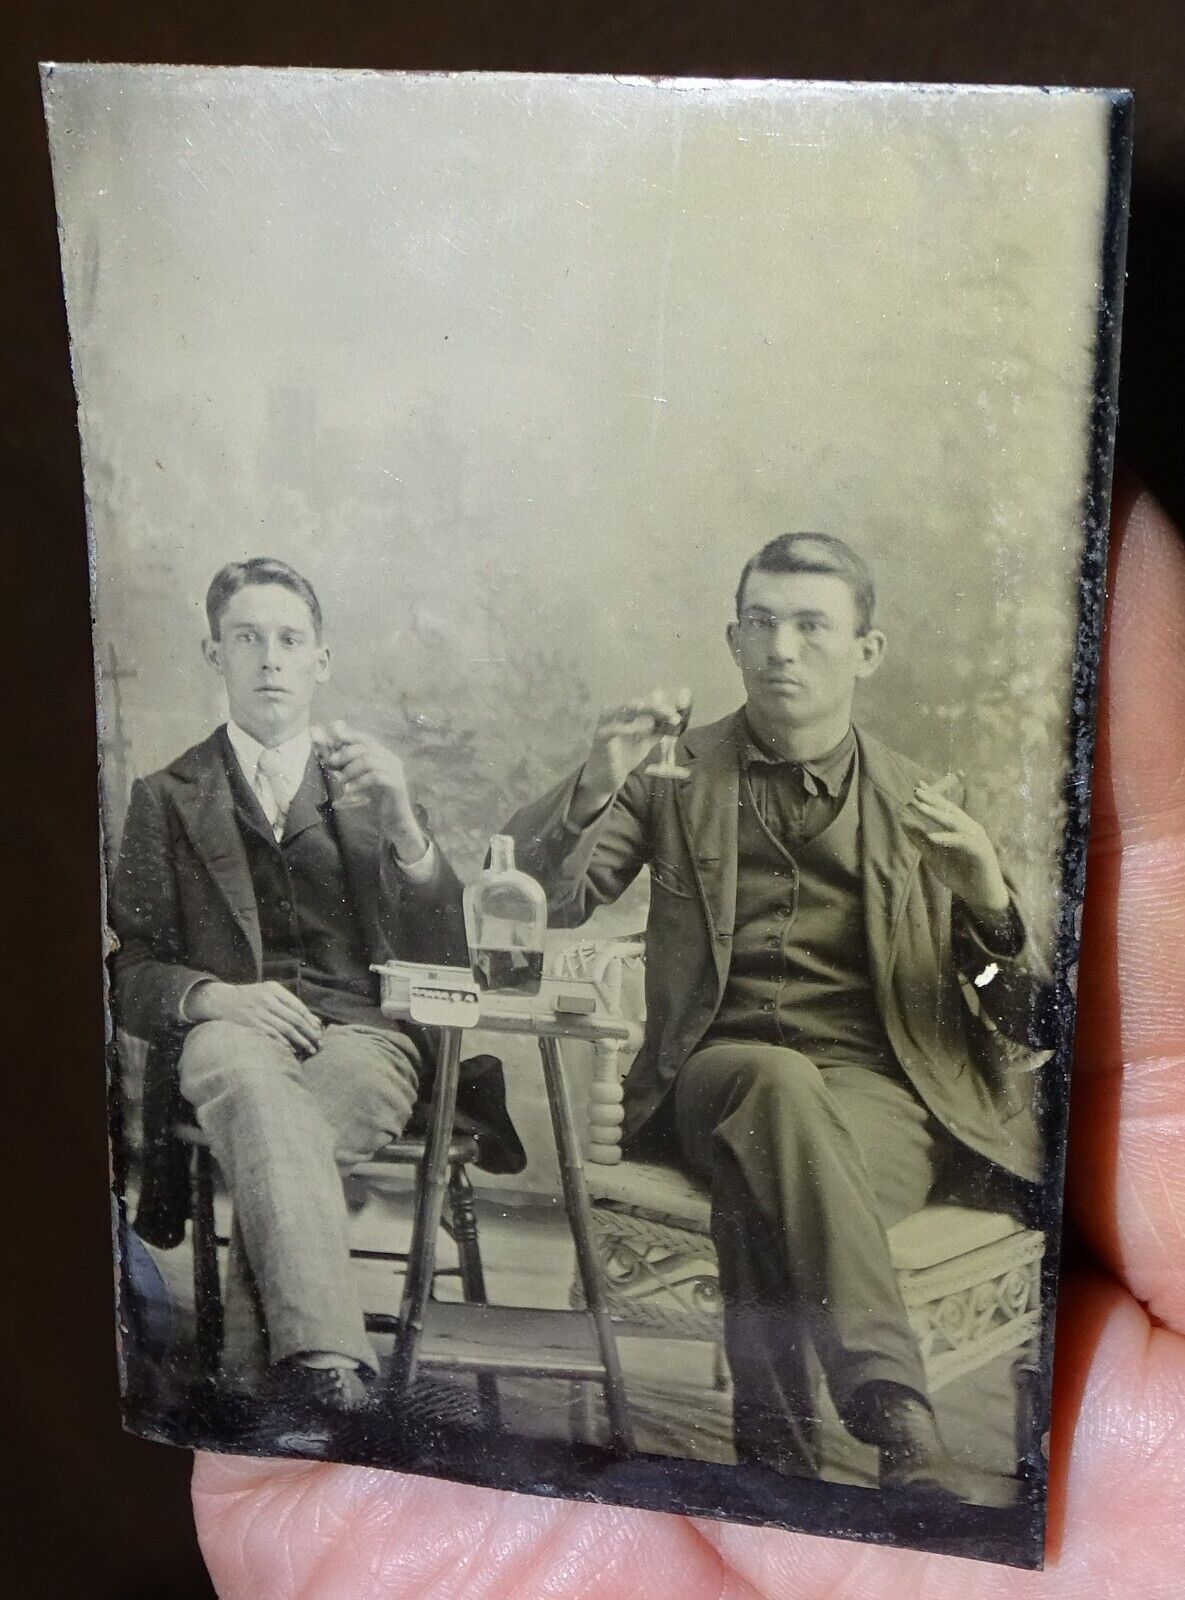 Tintype Photograph of 2 gents with whiskey and cigarettes, circa 1860s or 1870s